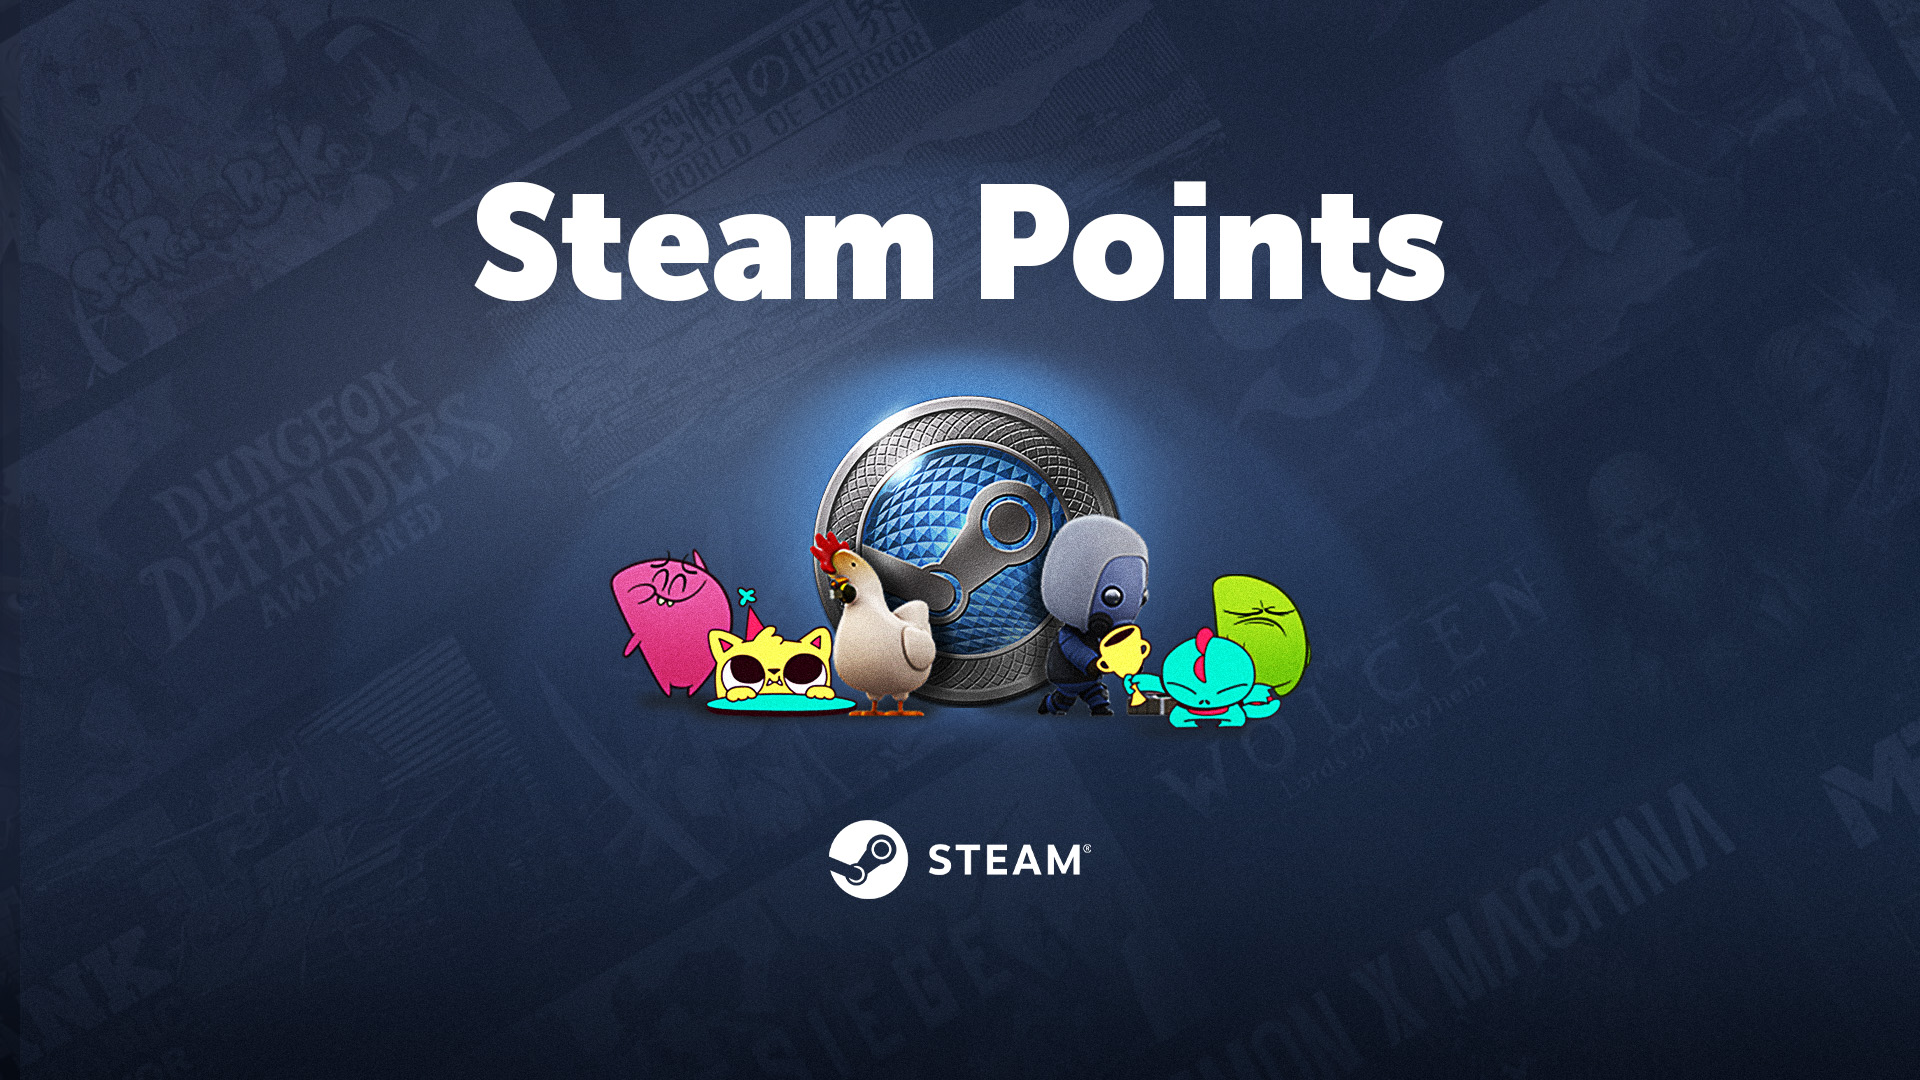 5.000 Steam Points Manual Delivery, $2.54